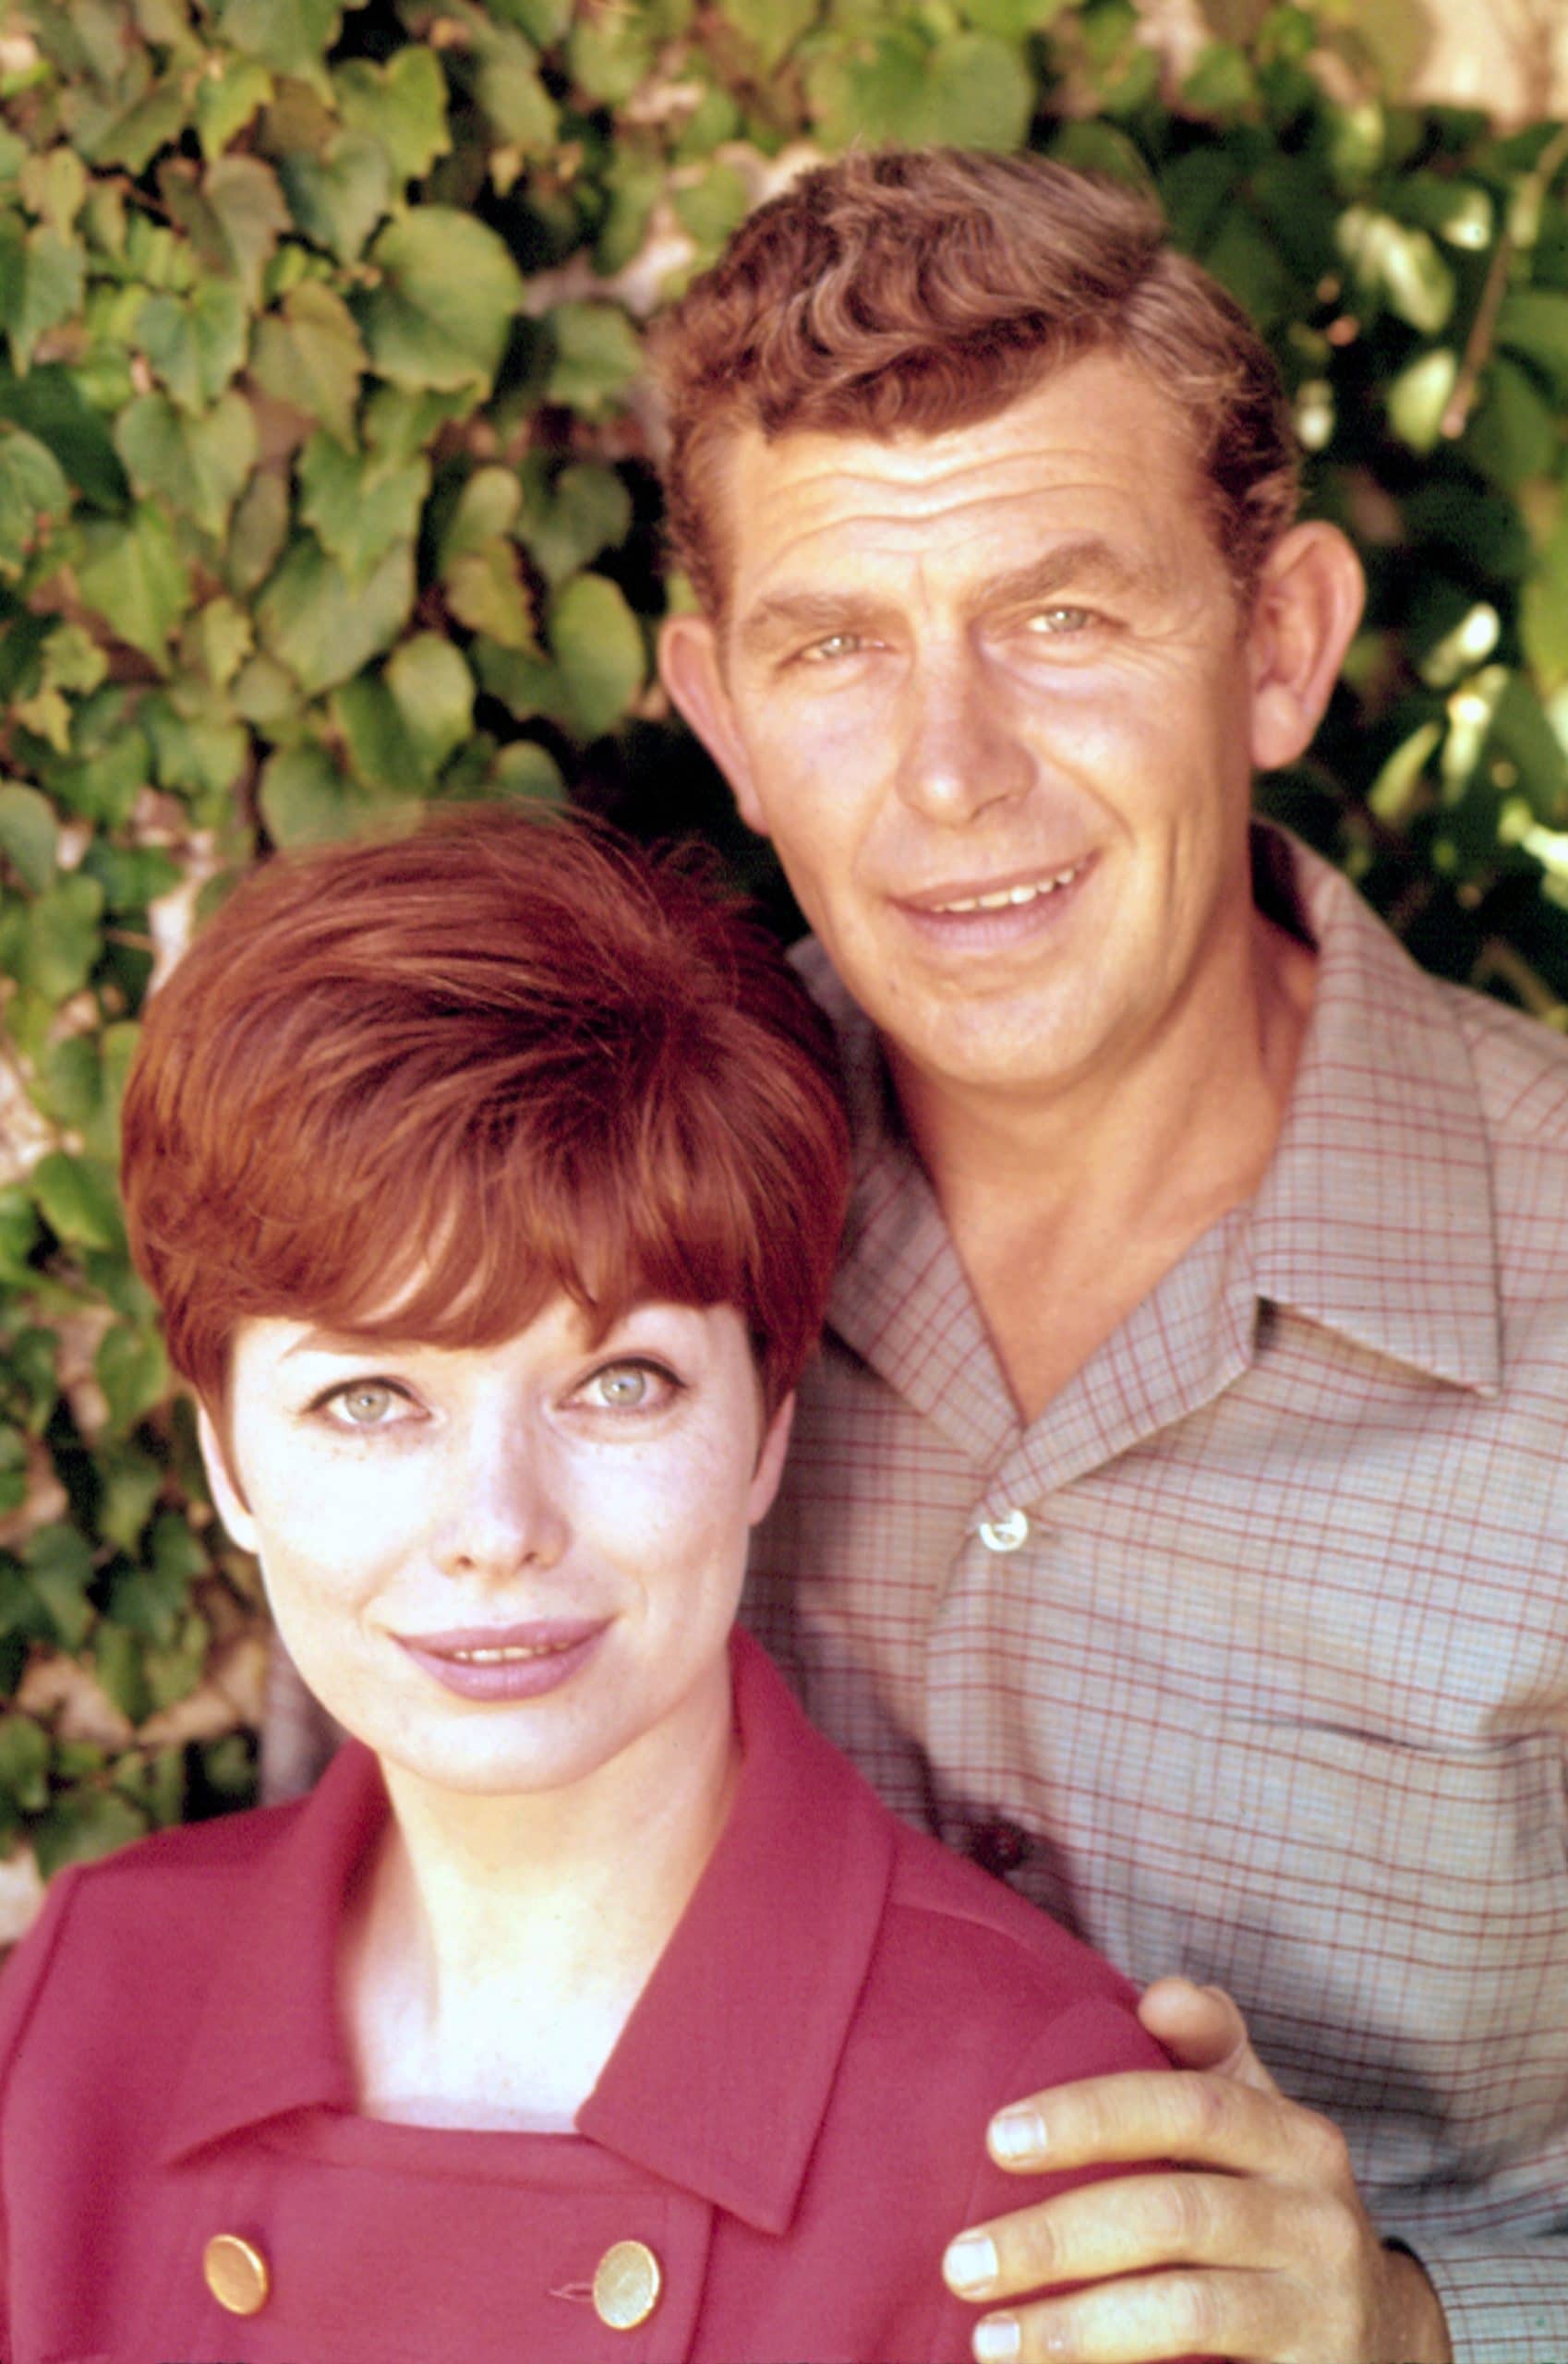 ANDY GRIFFITH SHOW, Andy Griffith, Aneta Corsaut, 1963-1968